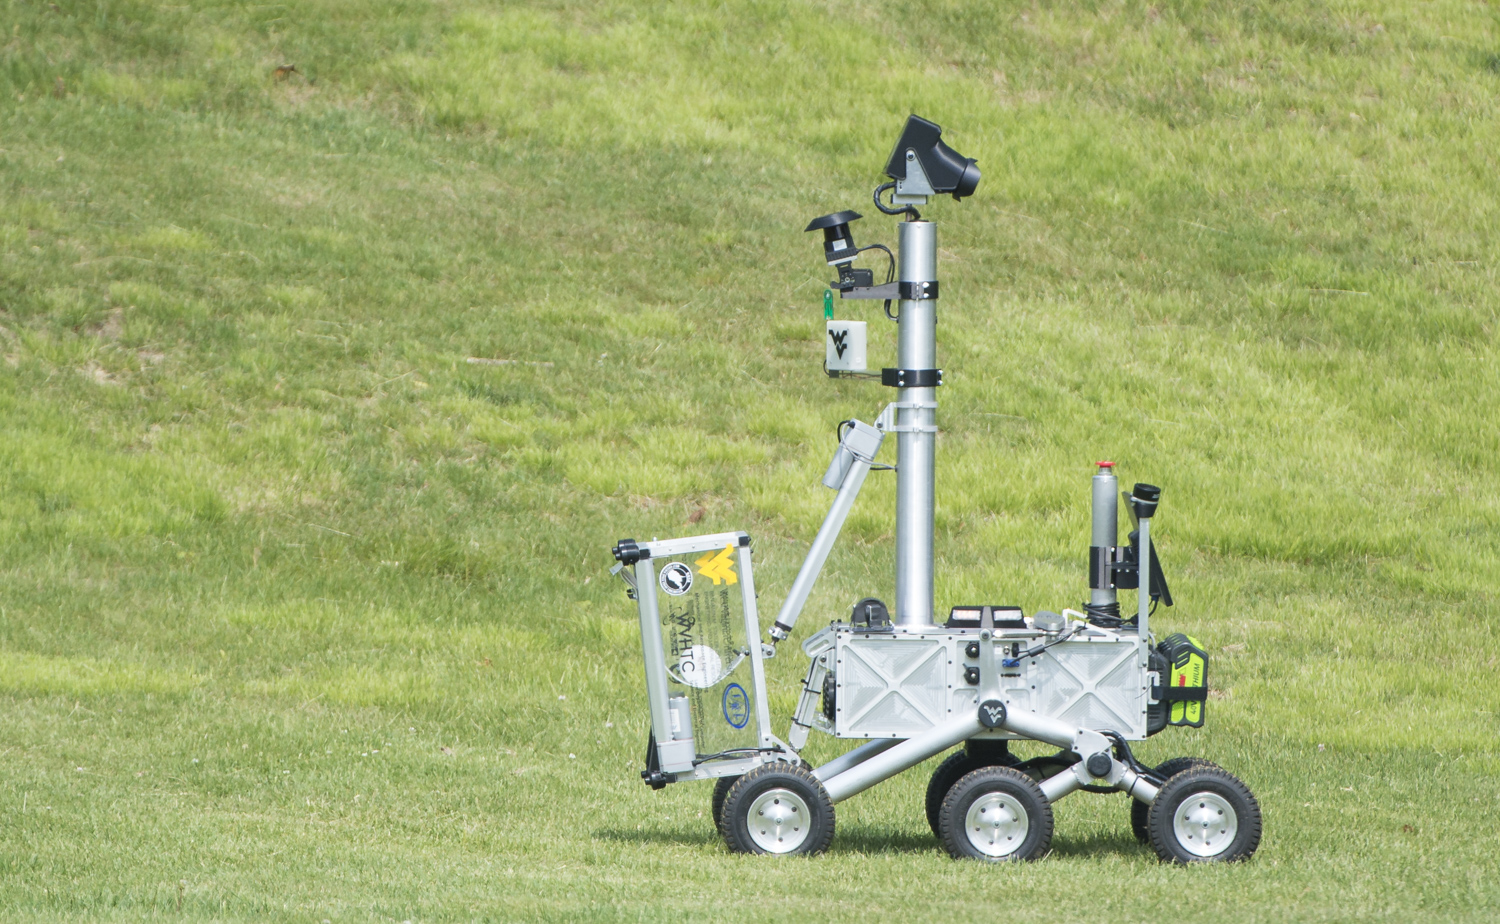 Robot designed by The Mountaineers, a team from West Virginia University, Morgantown